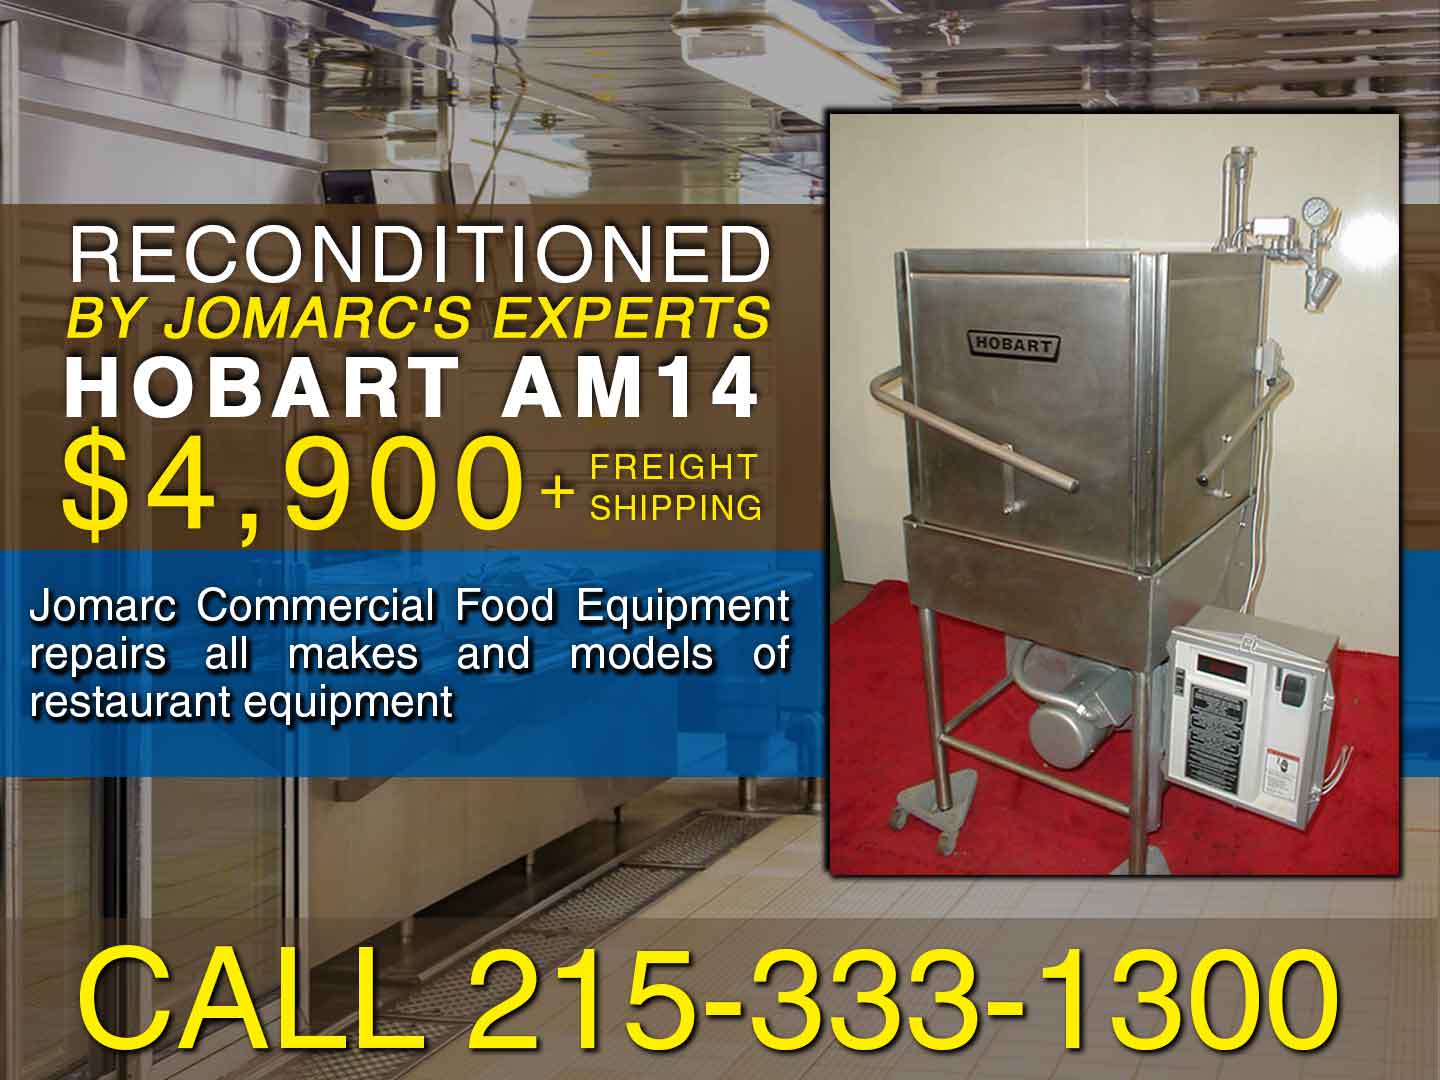 Commercial Oven Repair Philadelphia Jomarc services all brands and models of ovens: Convection Countertop Microwave Combination Ovens Conveyor and Impinger Rapid Cook / High Speed Rotisserie Multi-Cook Bakery Cook and Hold Cabinets Indoor Roaster Smoker Microwaves Light Duty Medium Duty Heavy Duty 